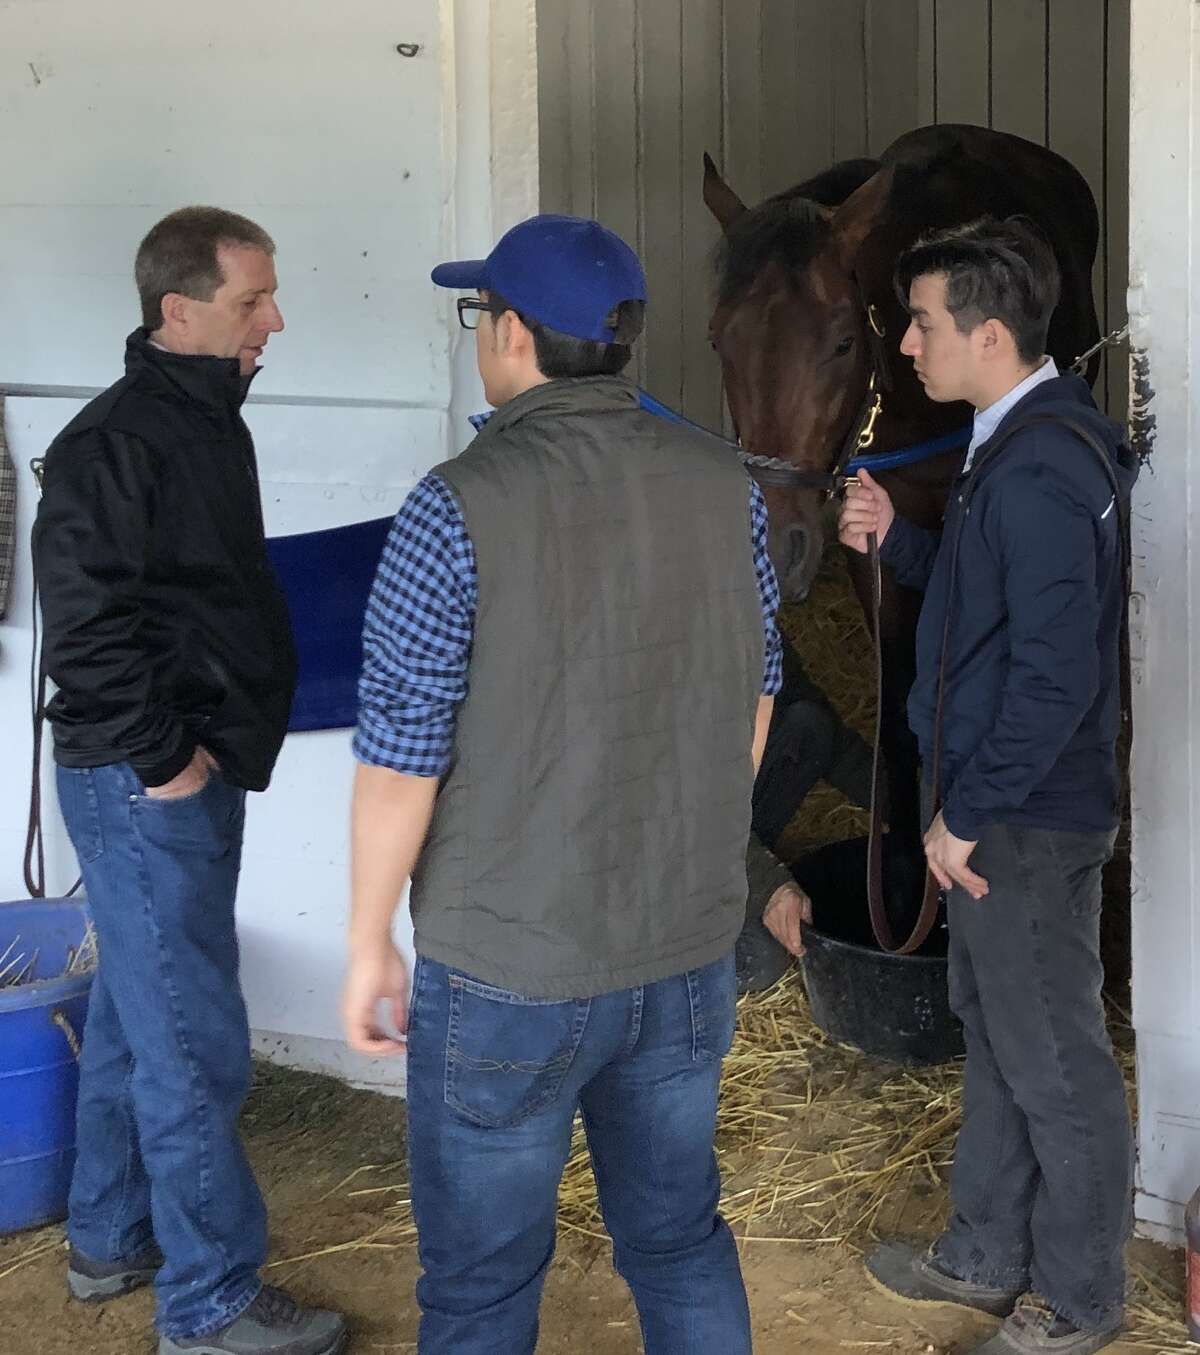 It didn't get as much attention as Omaha Beach got, but there was another horse on the Churchill Downs grounds that had his date with the Kentucky Derby thrust into a cloud of doubt. That's Haikal, the third place finisher in the Wood Memorial, standing in his stall surrounded by his handlers Thursday morning. Haikal did not train Thursday after it was found that he had an abscess in his left front foot. Trainer Kiaran McLaughlin said the colt would have the foot soaked in Epsom salts all day Thursday in hopes of curing the ailment. If you look close enough, you can see the tub of water in front of Haikal, who seems like he is a very good patient. (Tim Wilkin / Times Union)